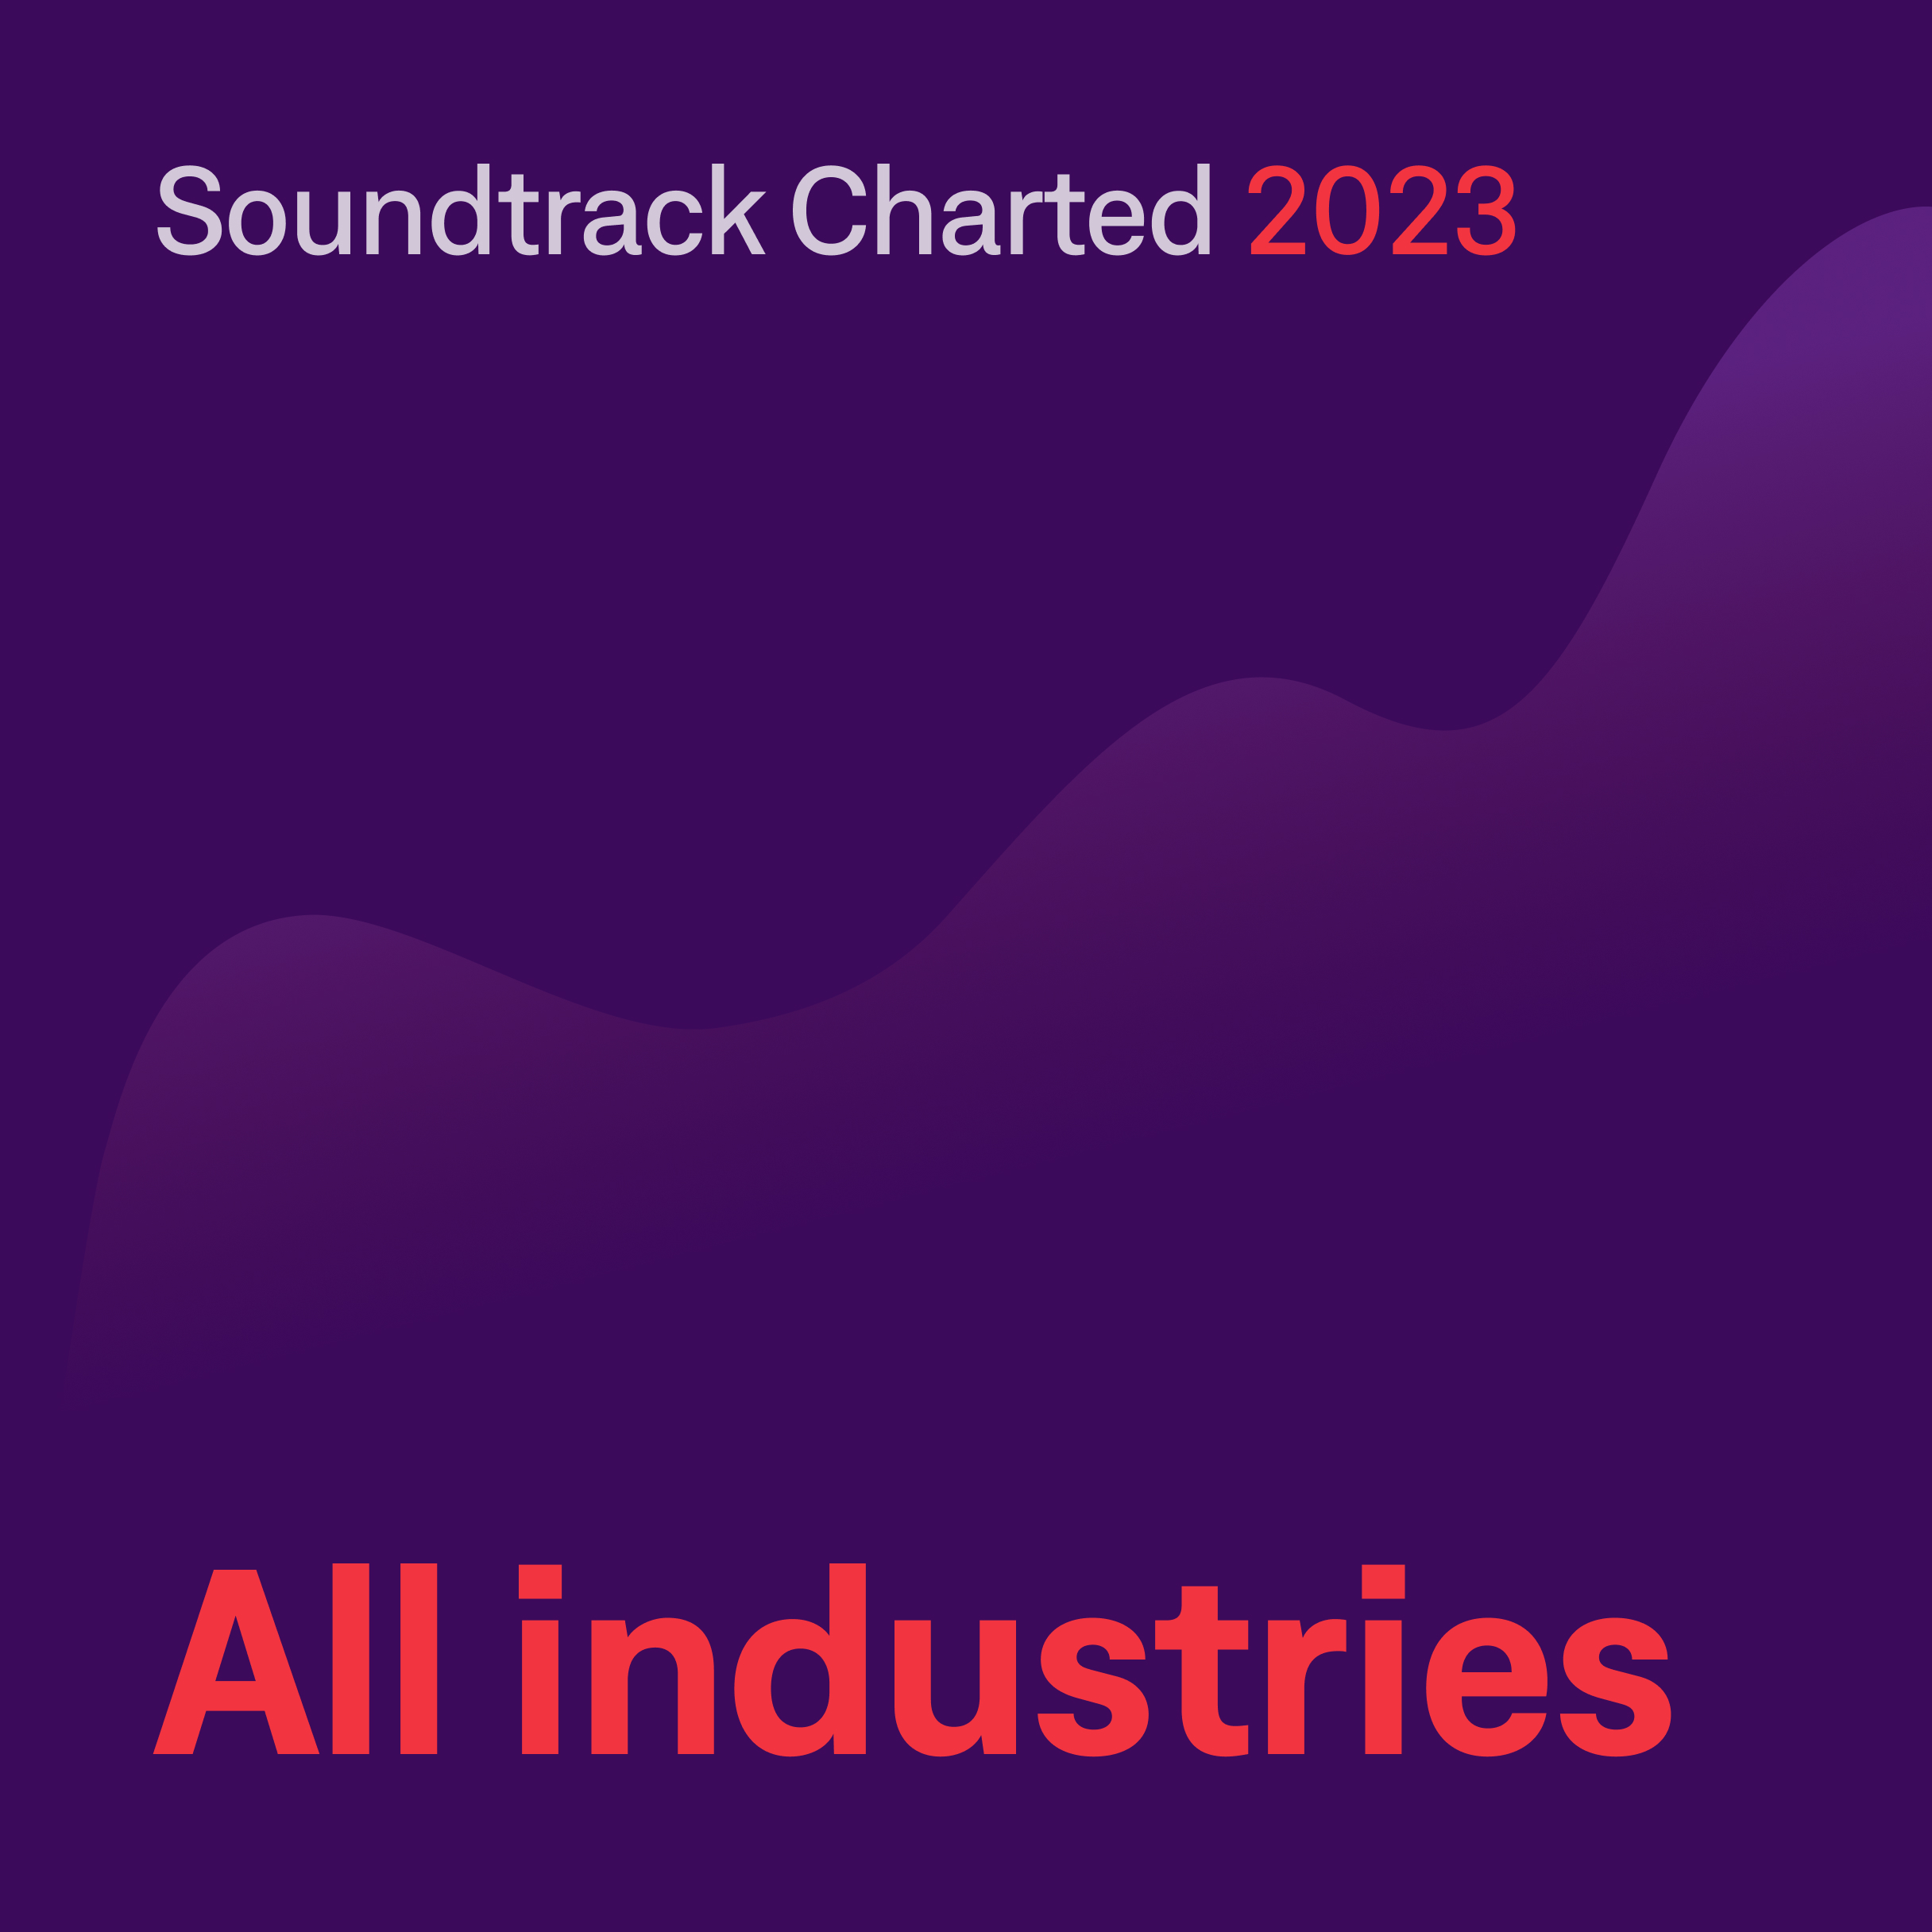 Soundtrack Charted 2023 - todos